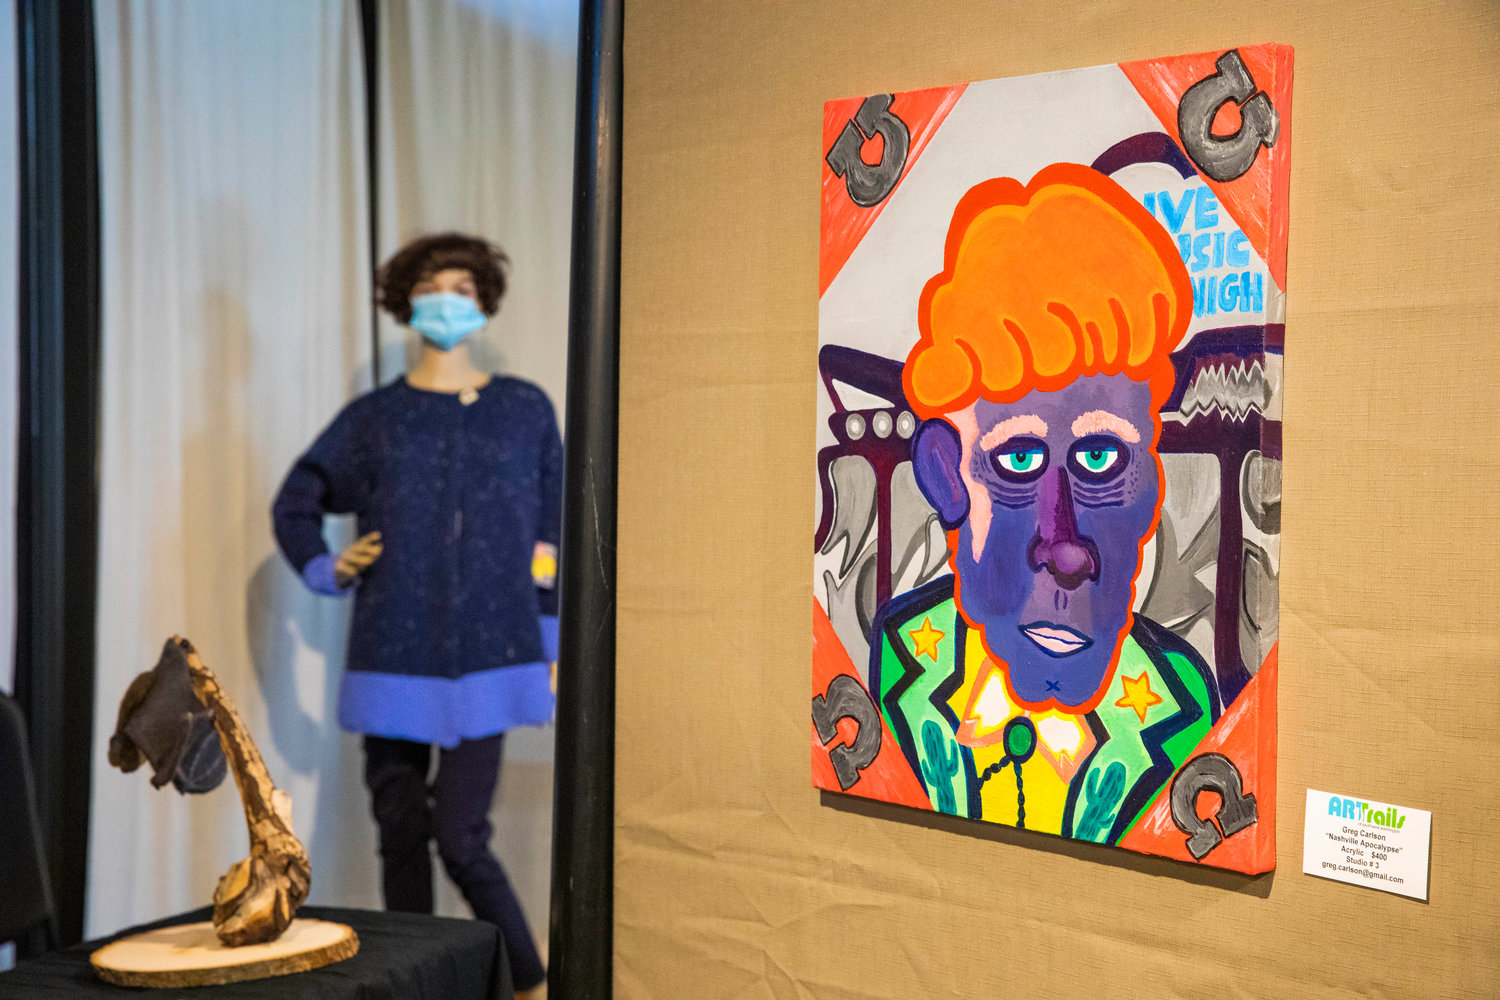 Artwork by Greg Carlson hangs on display alongside creative pieces from other artists Tuesday afternoon in Centralia.